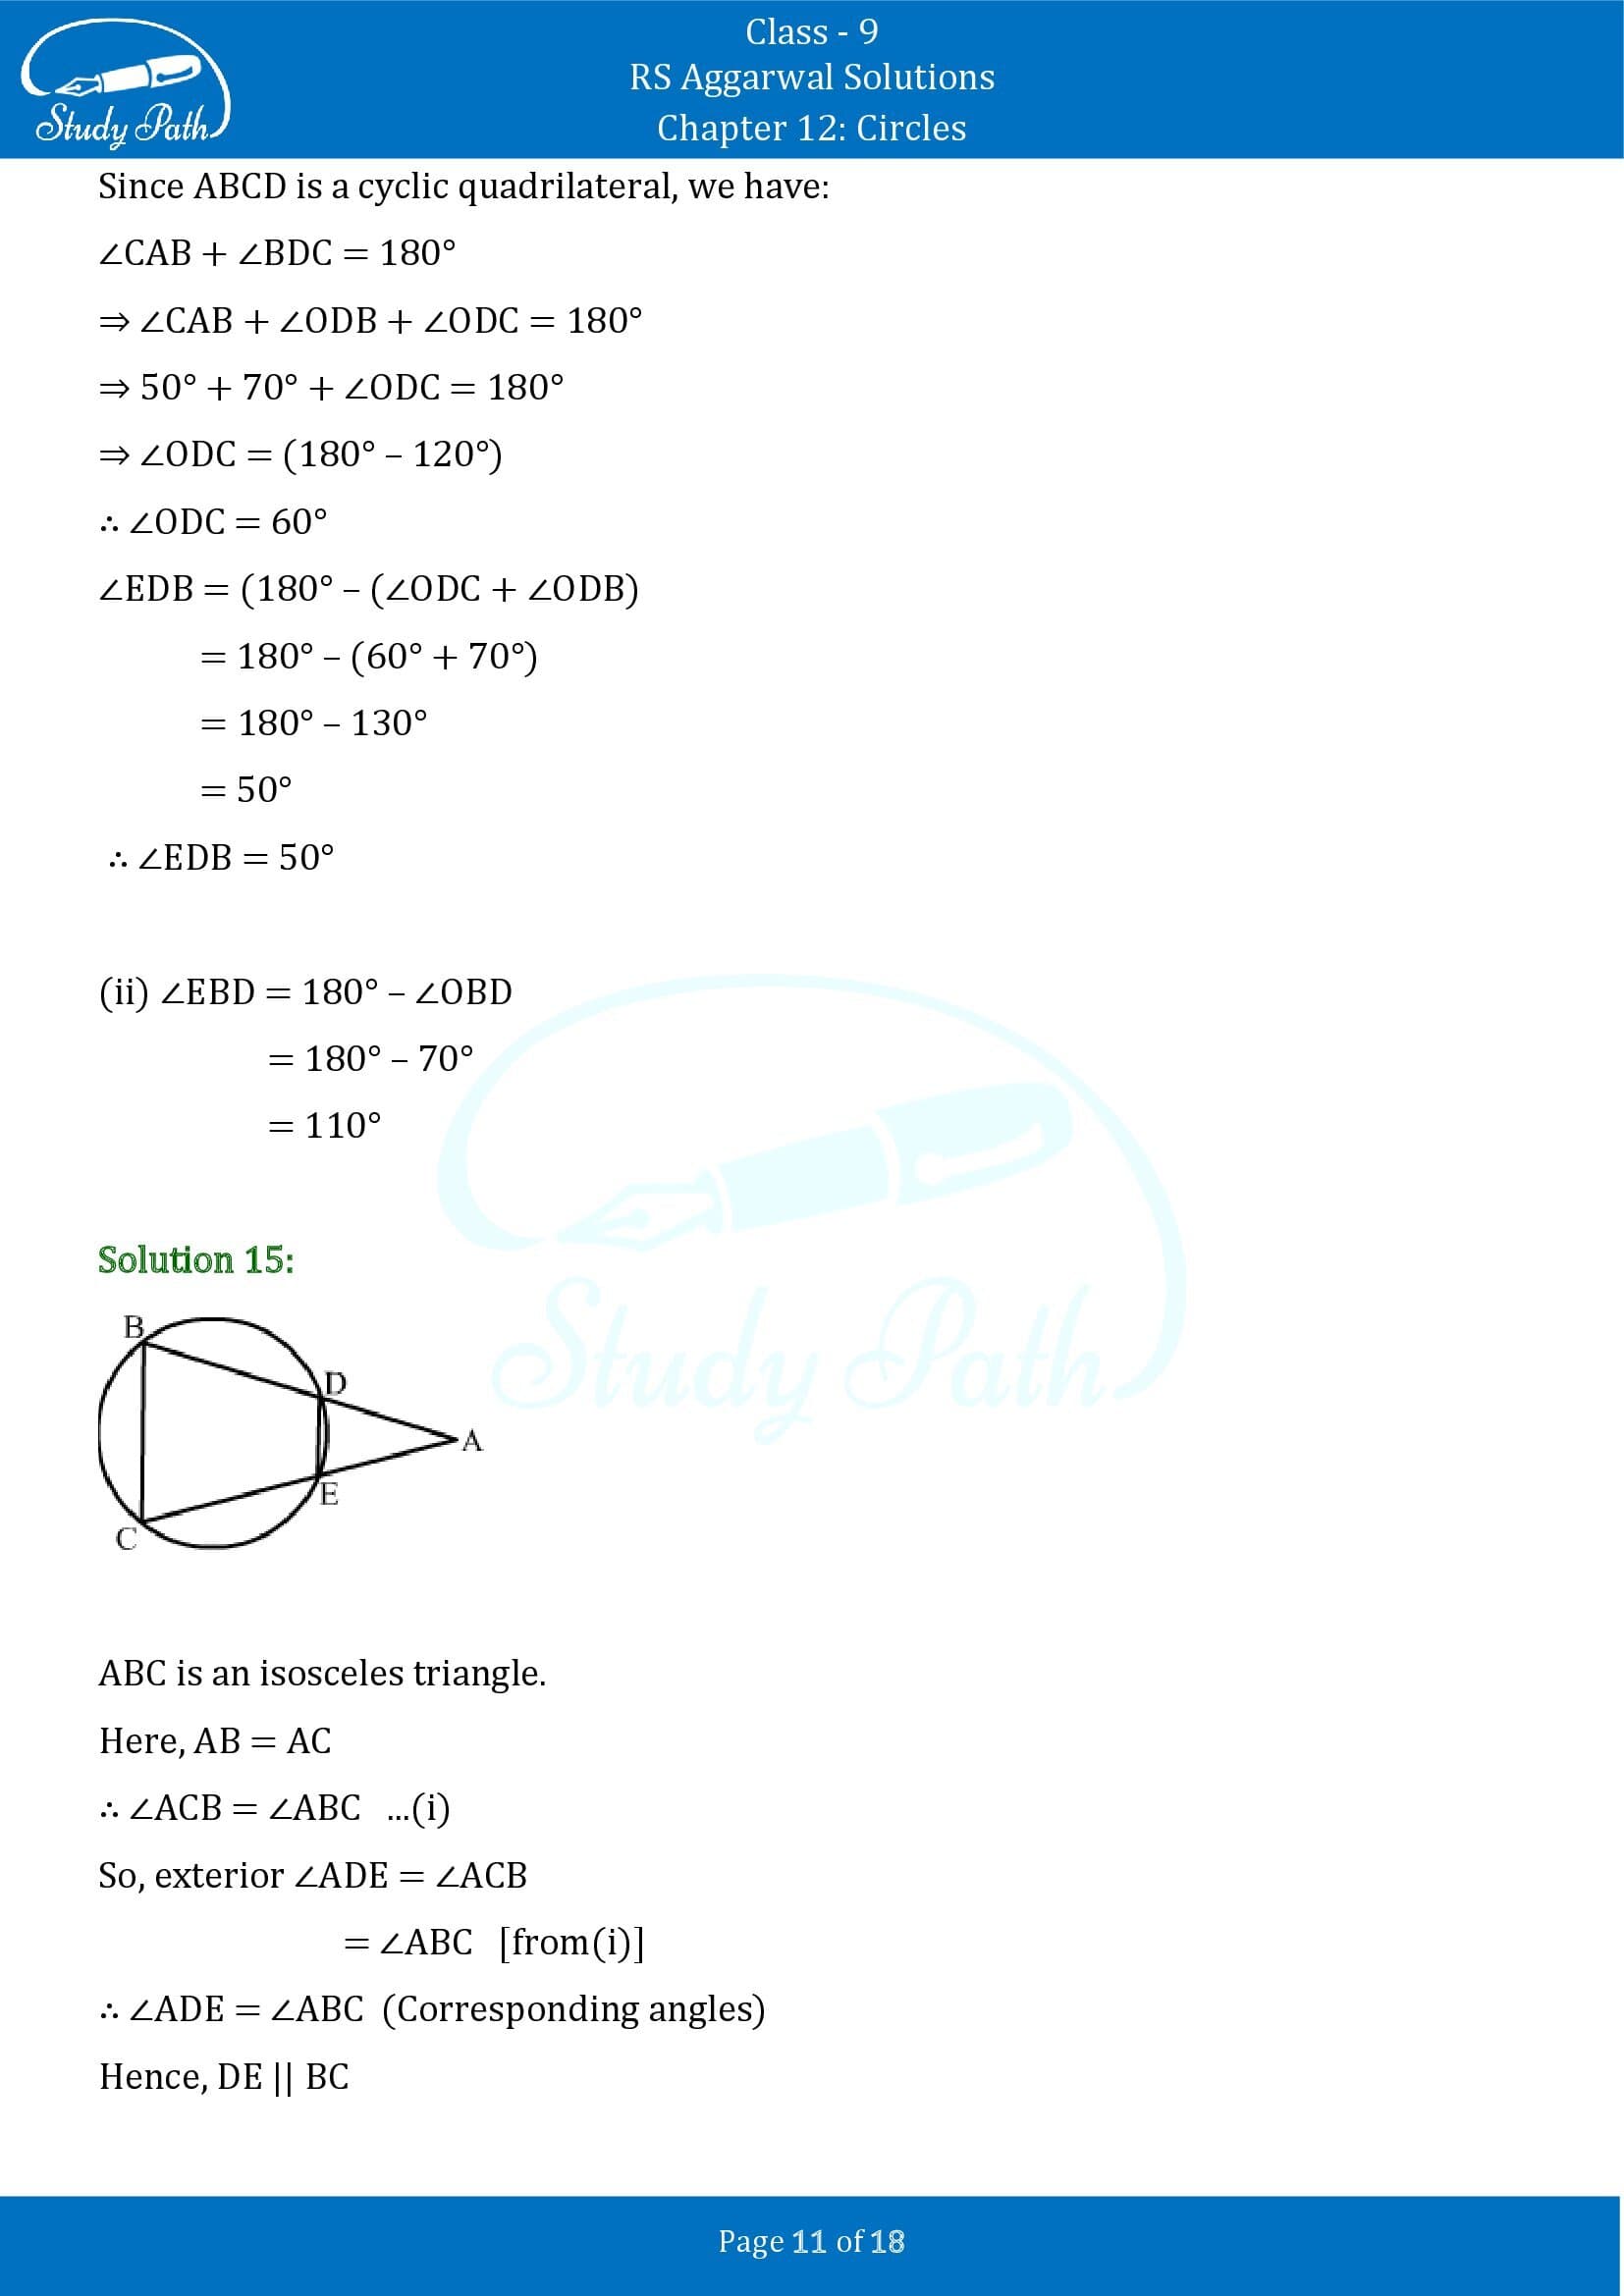 RS Aggarwal Solutions Class 9 Chapter 12 Circles Exercise 12C 00011